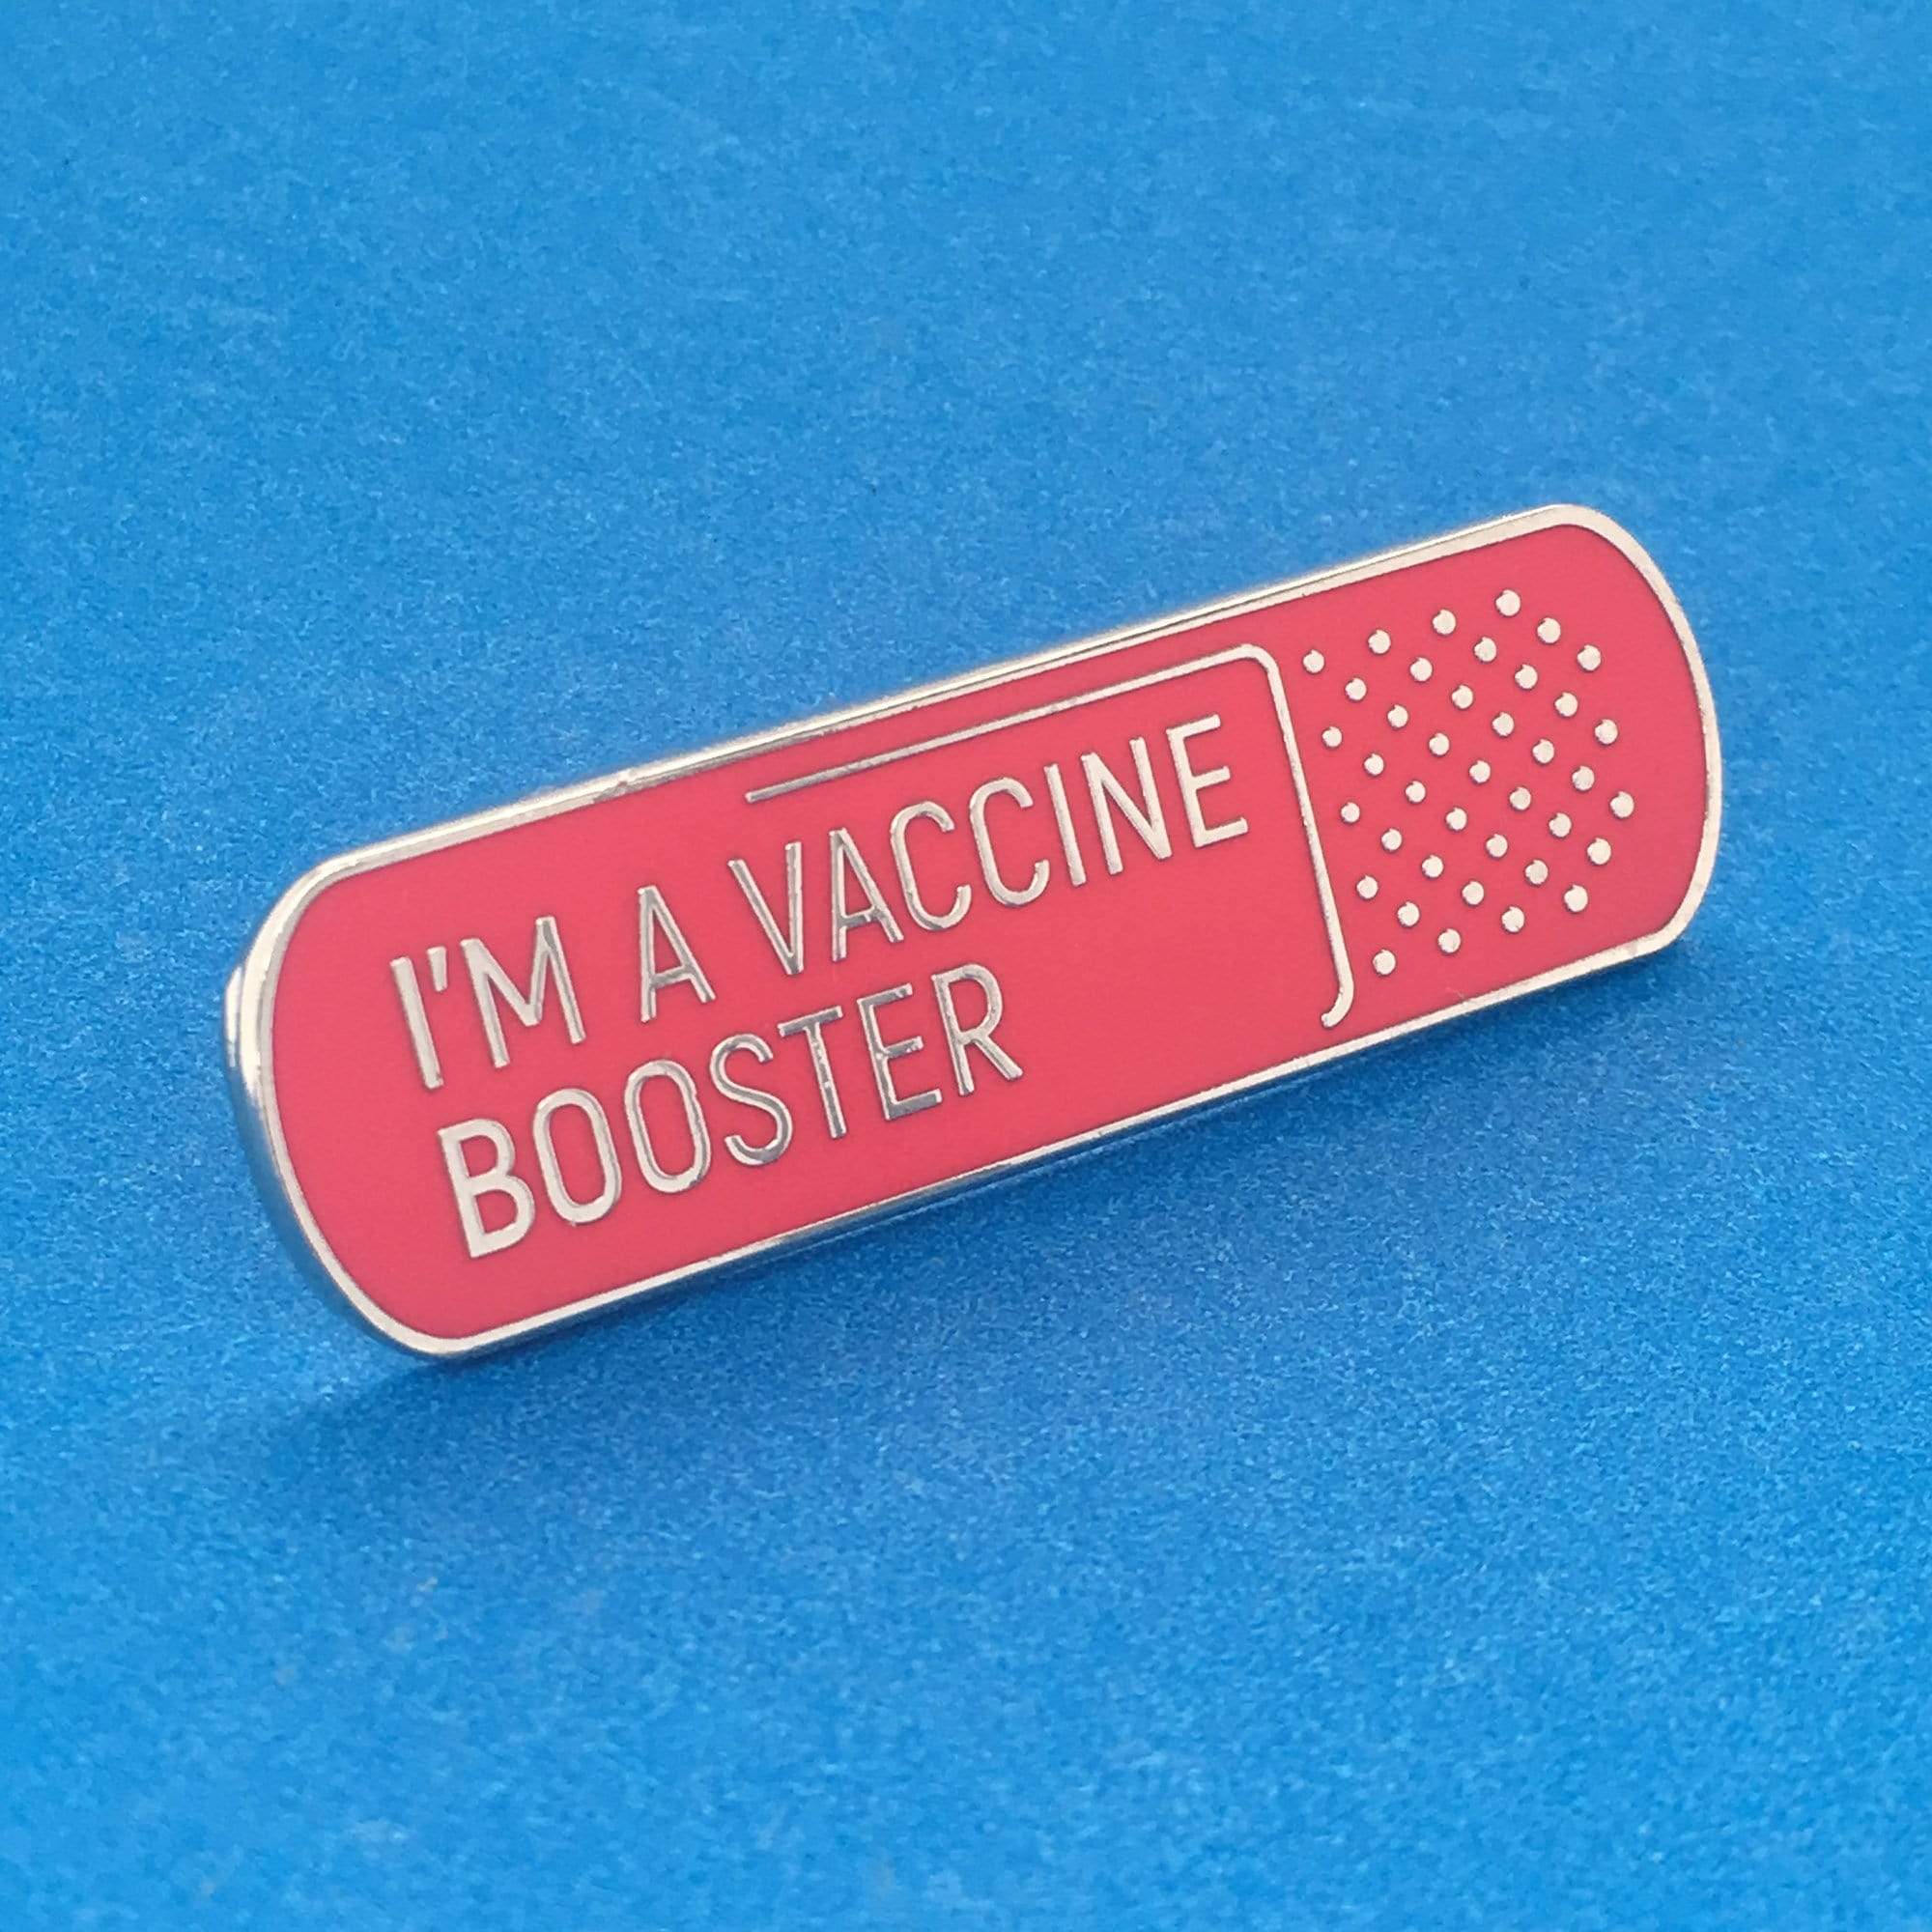 I'm a Vaccine Booster - Bandage Pin